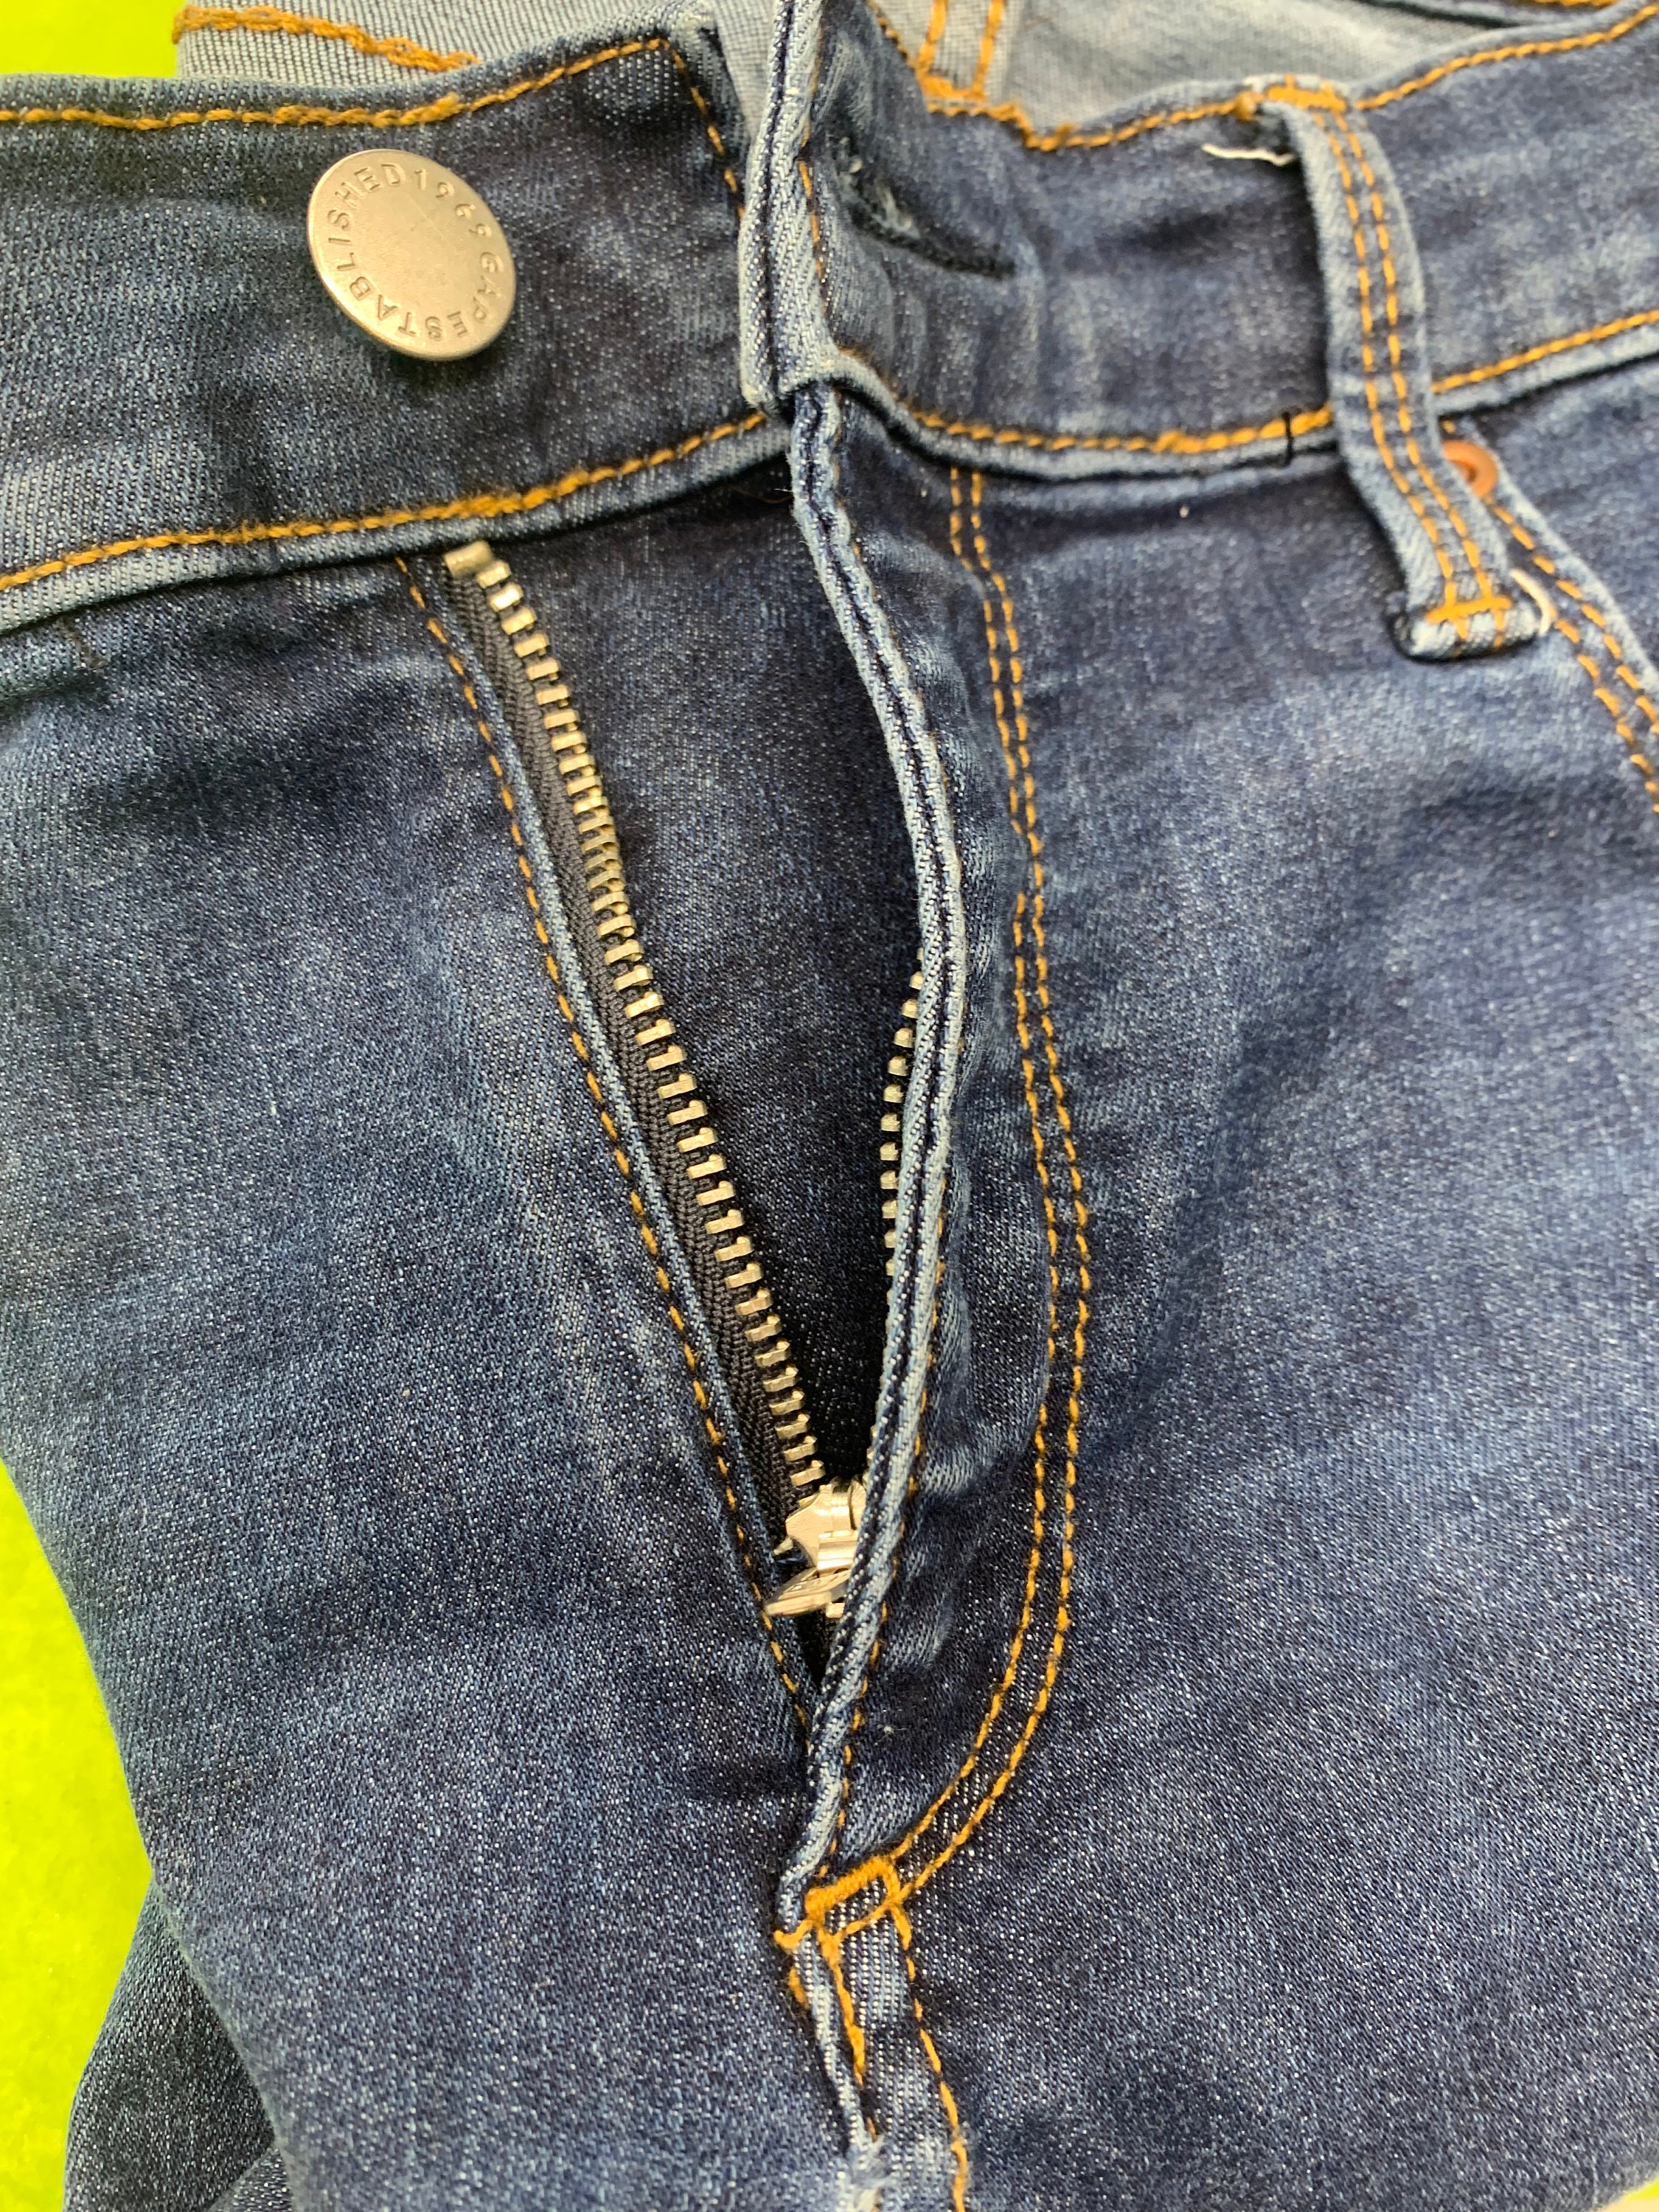 Trouser Alterations Cost Guide  Airtasker UK